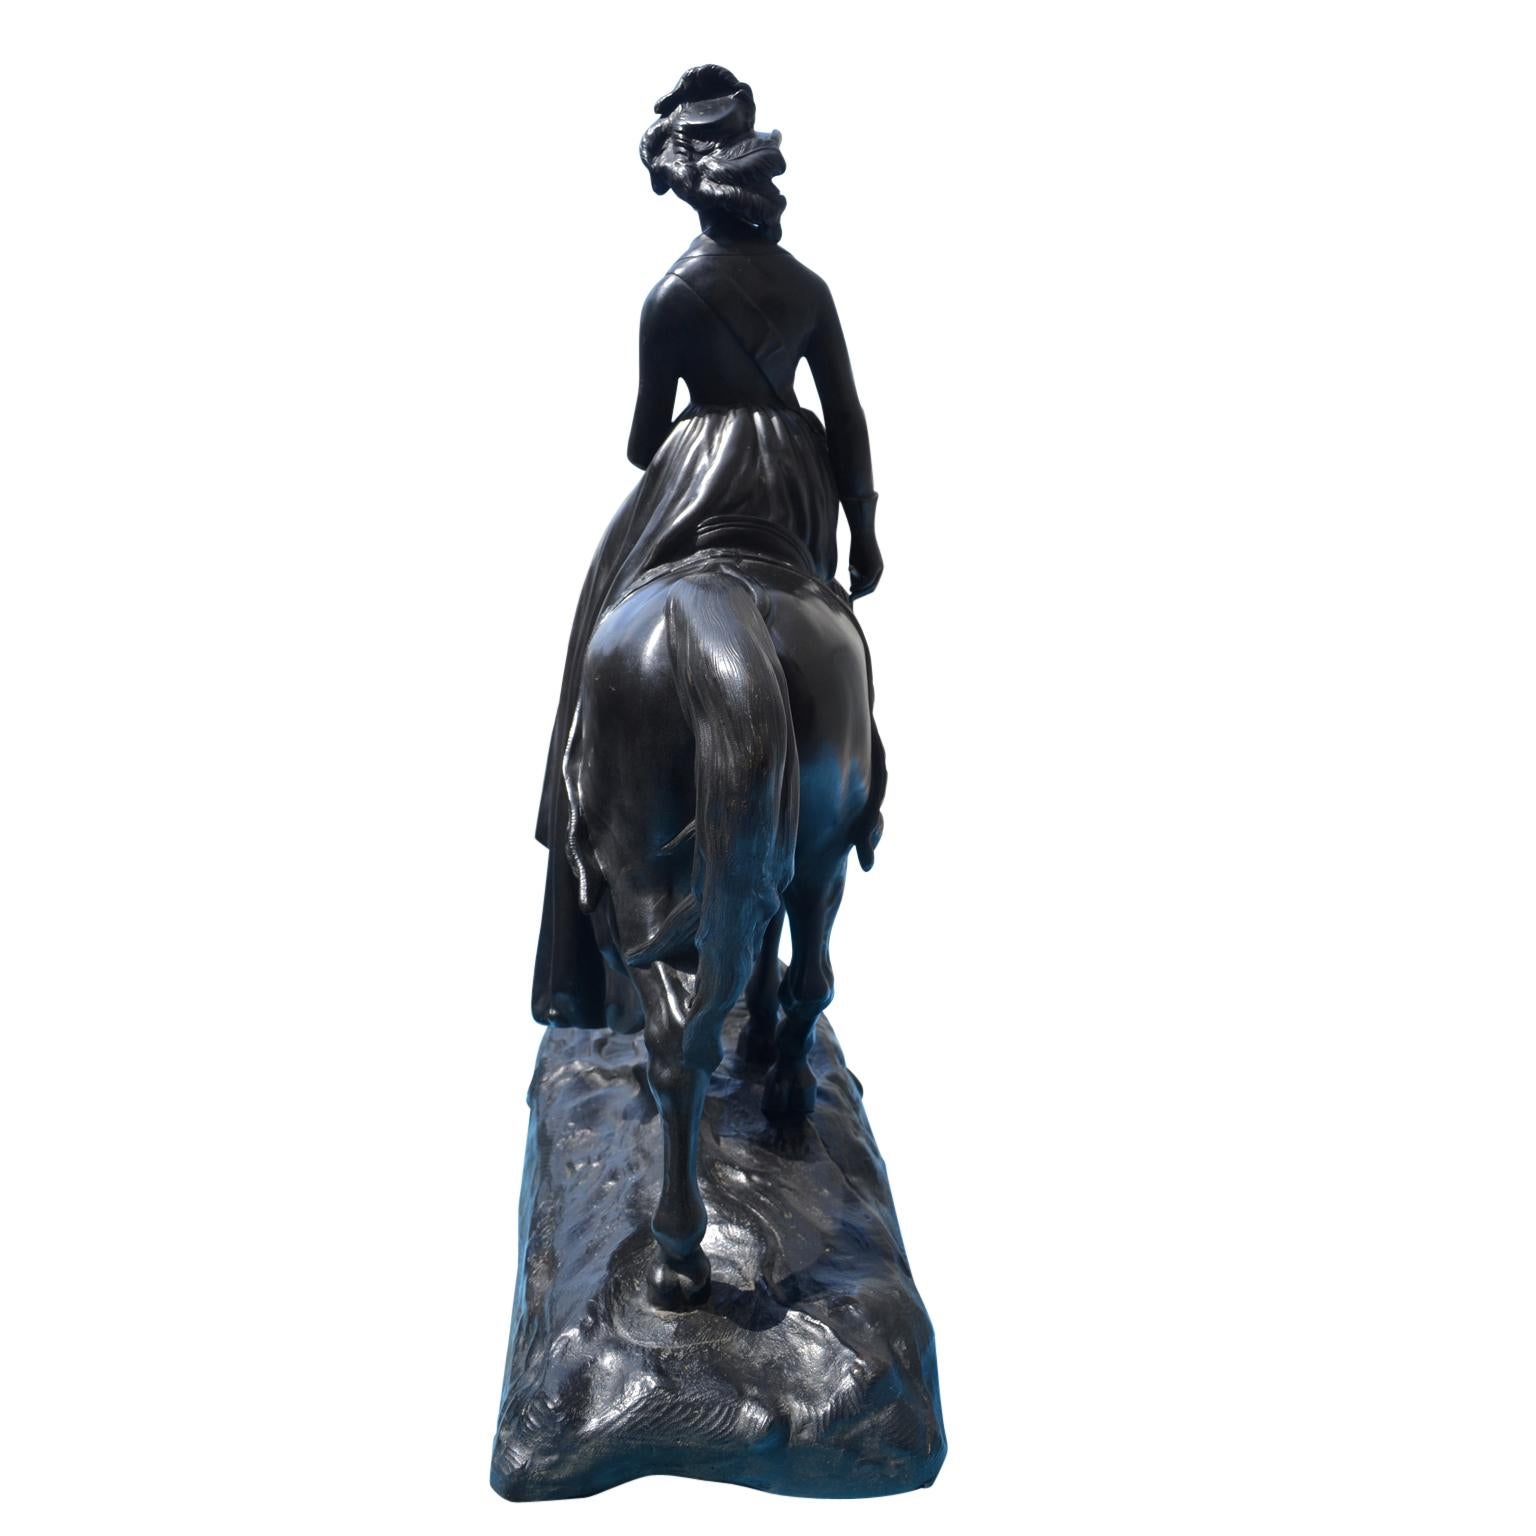 Early Victorian 19th Century Equestrian Bronze Statue of the Young Queen Victoria on Horseback